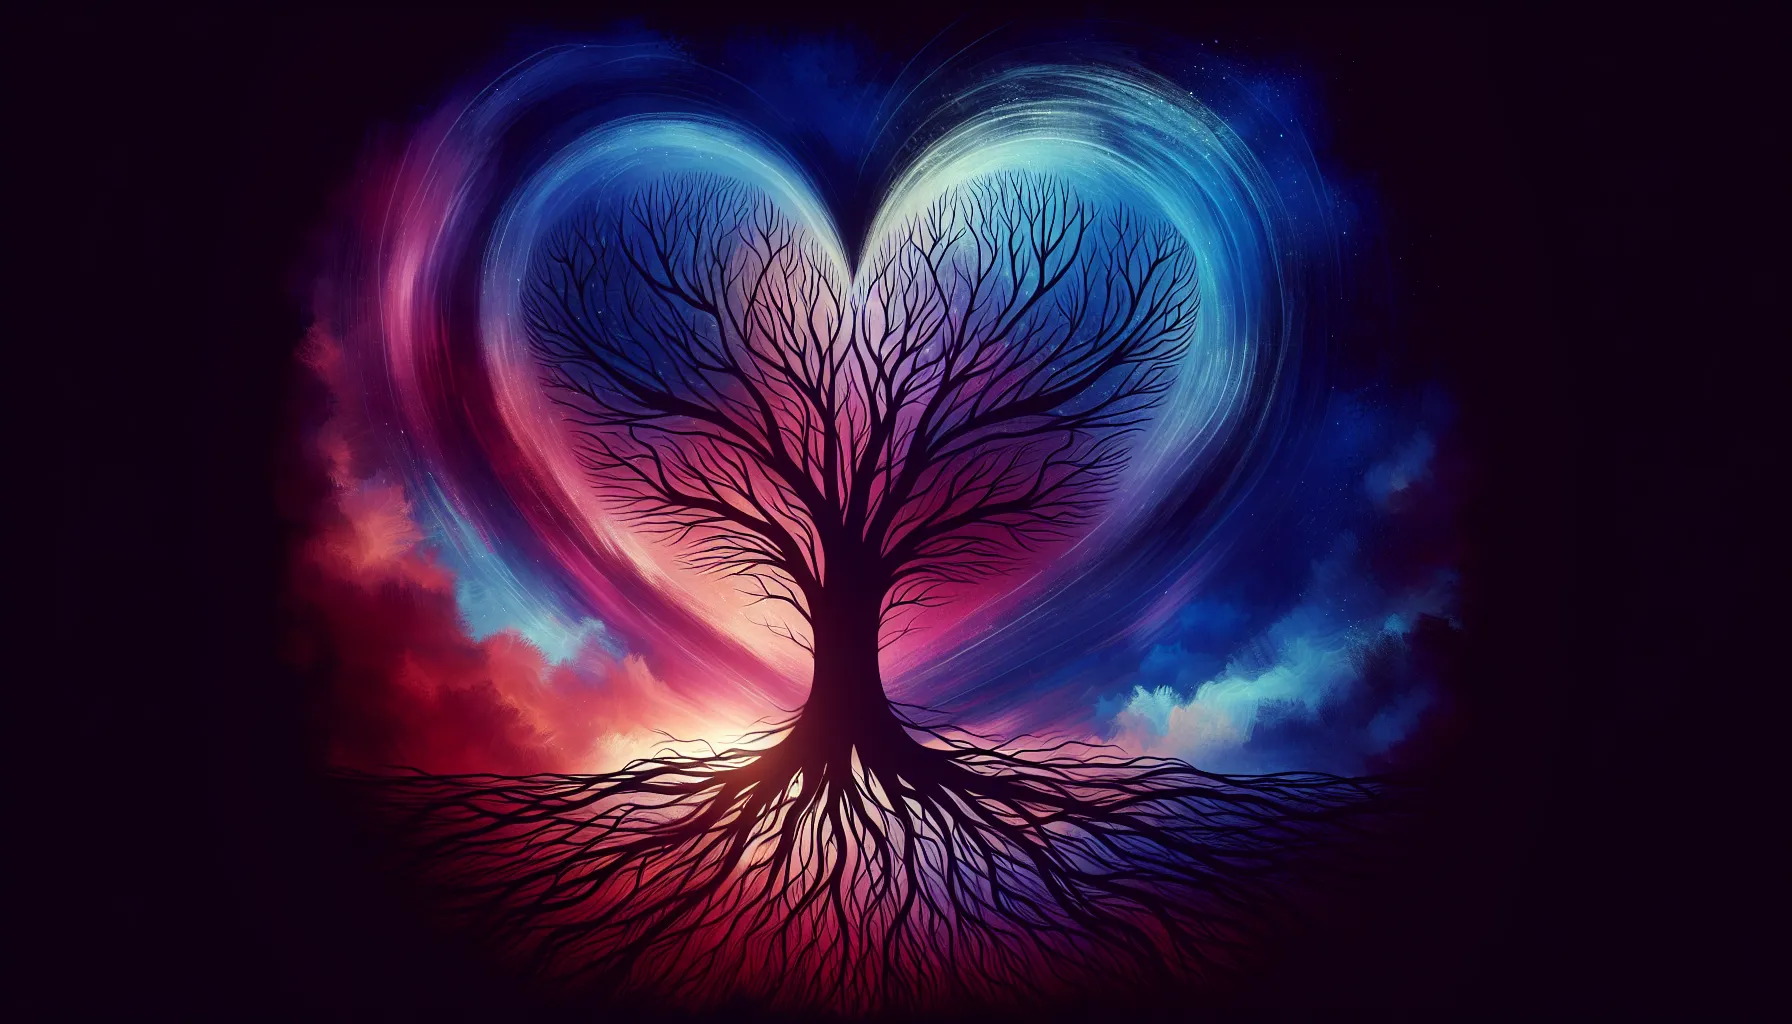 The <strong>heart's perennial bloom</strong>, with roots entwined in life's rich soil and branches that stretch towards tomorrow's promise, embodies the deep emotional connection of mature love.